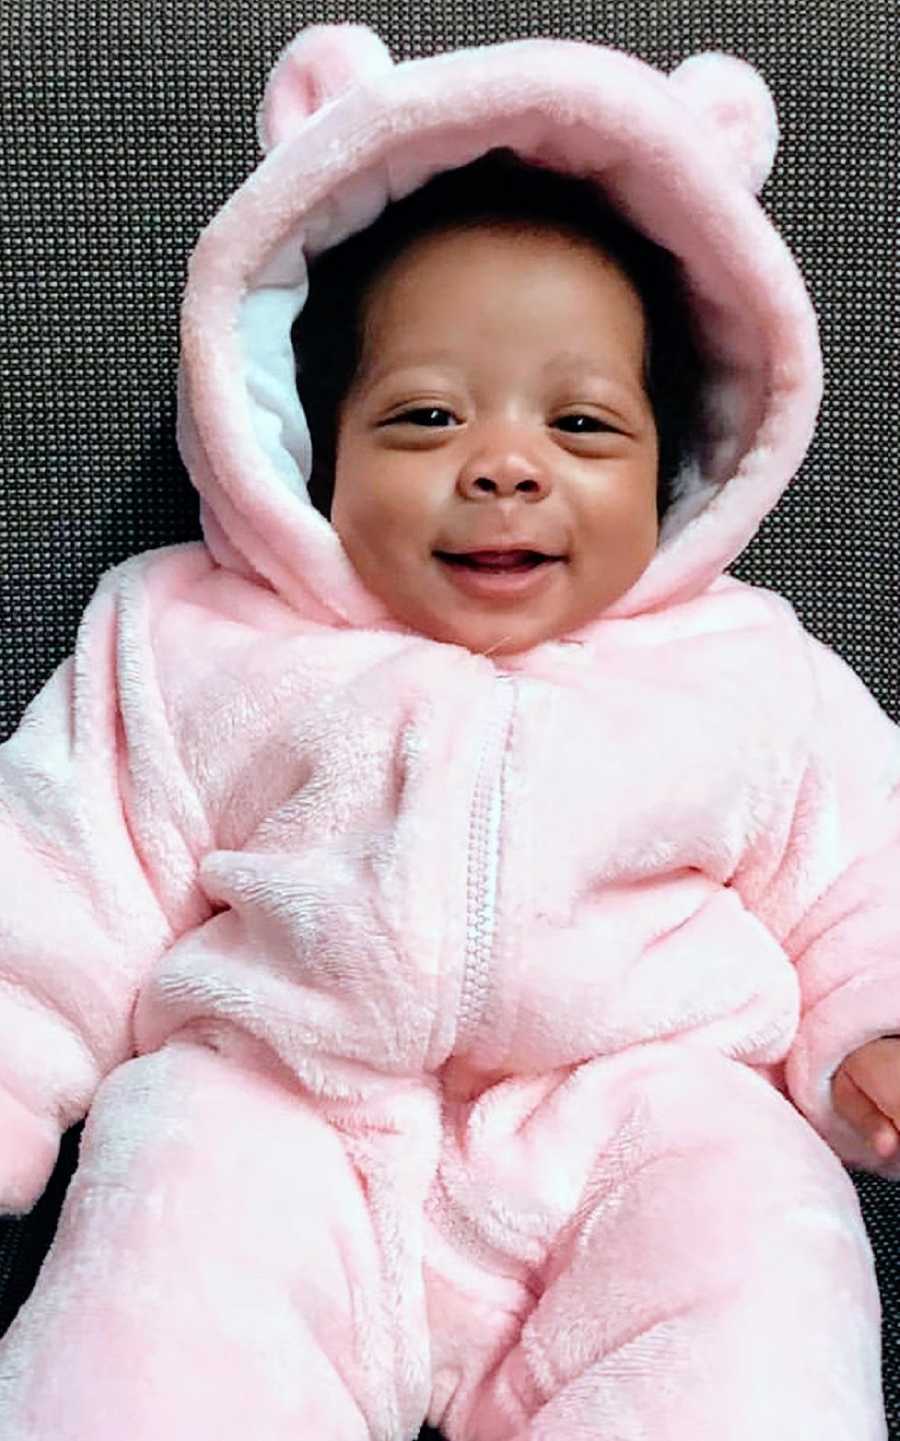 A baby girl wearing a puffy pink onesie